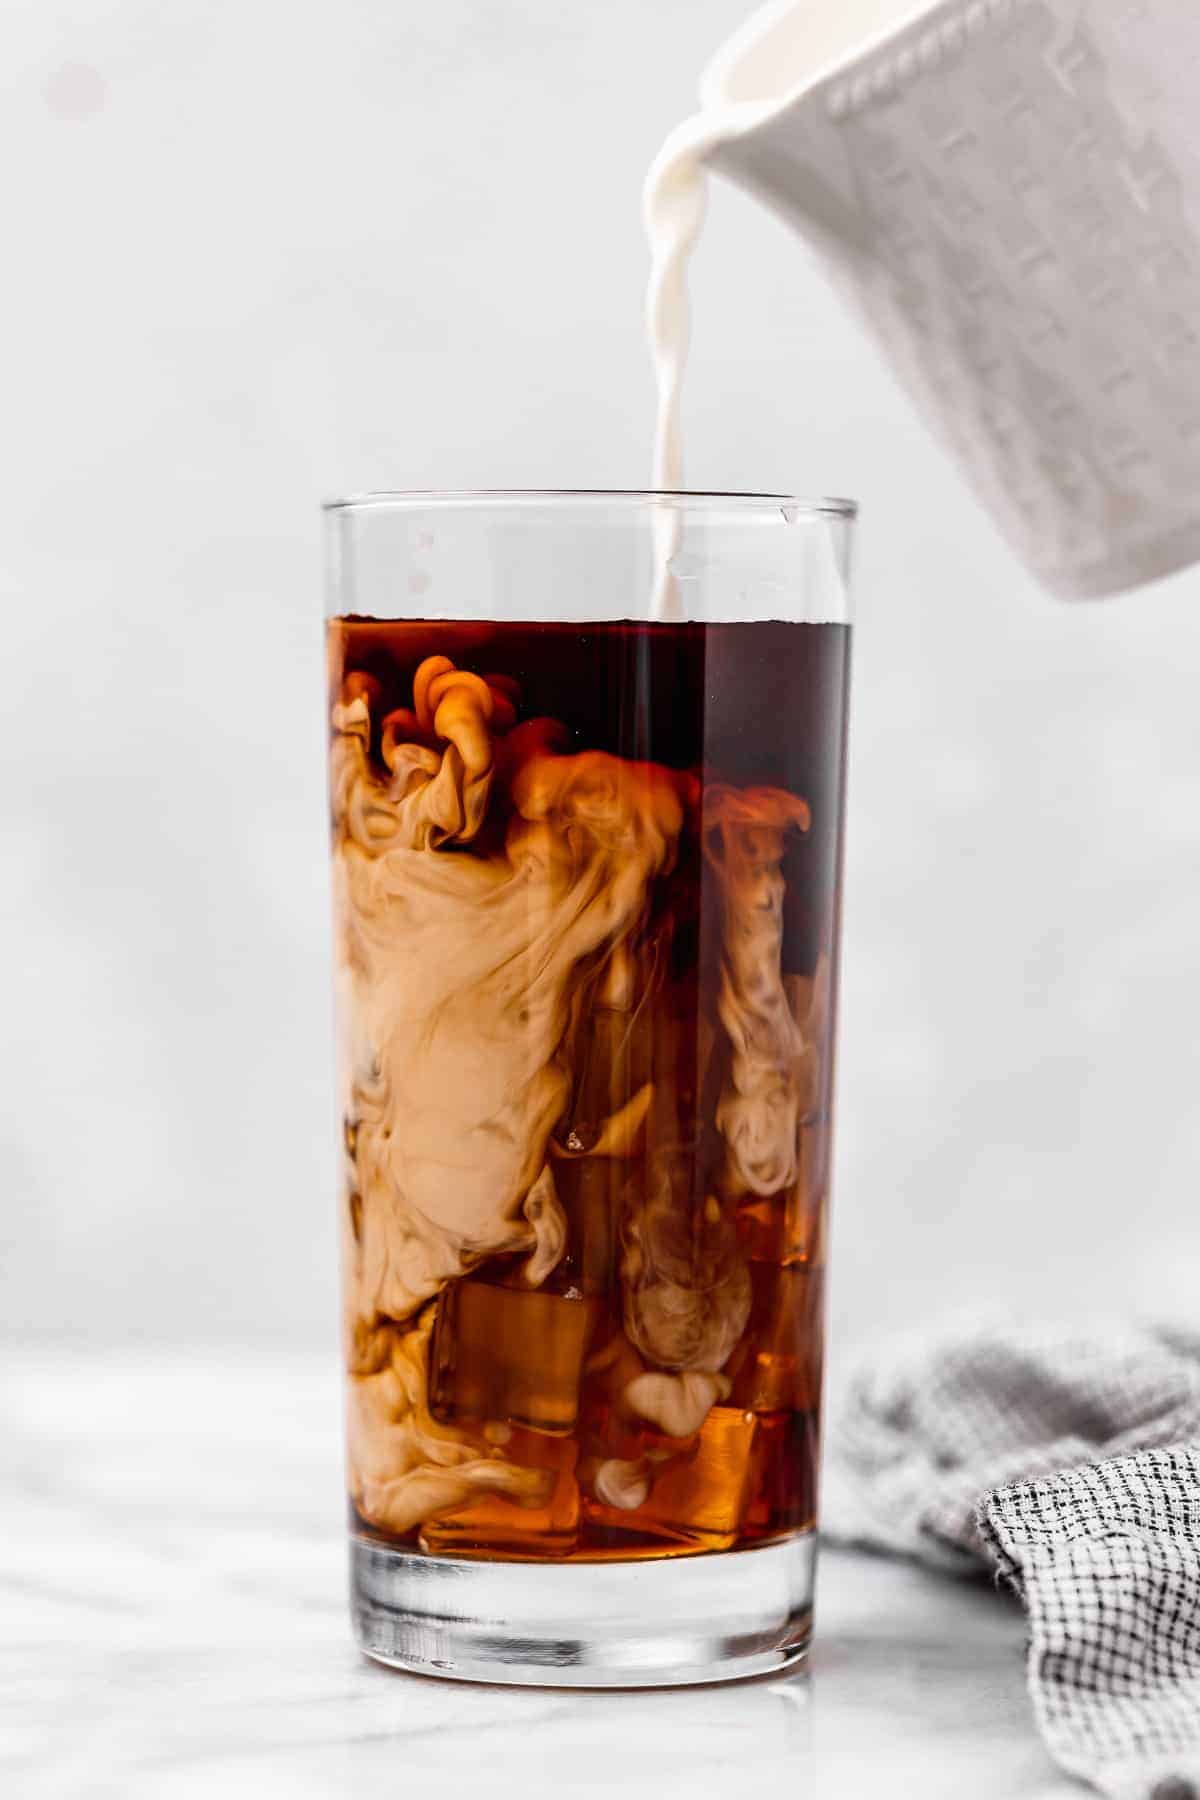 Vegan heavy cream being poured into glass of iced coffee